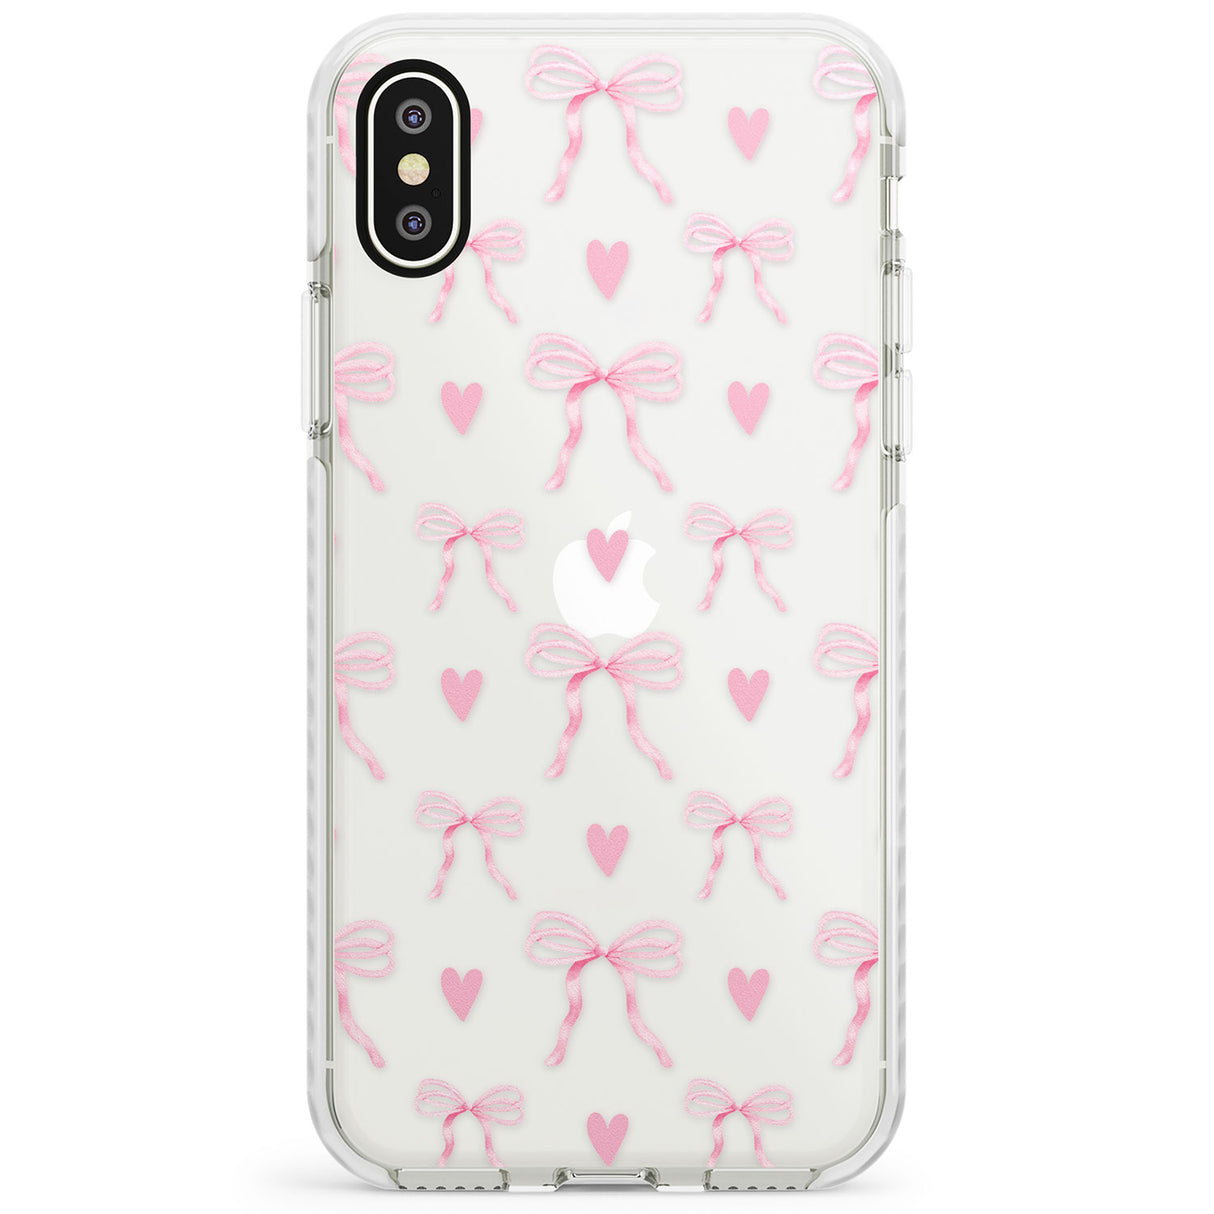 Pink Bows & Hearts Impact Phone Case for iPhone X XS Max XR